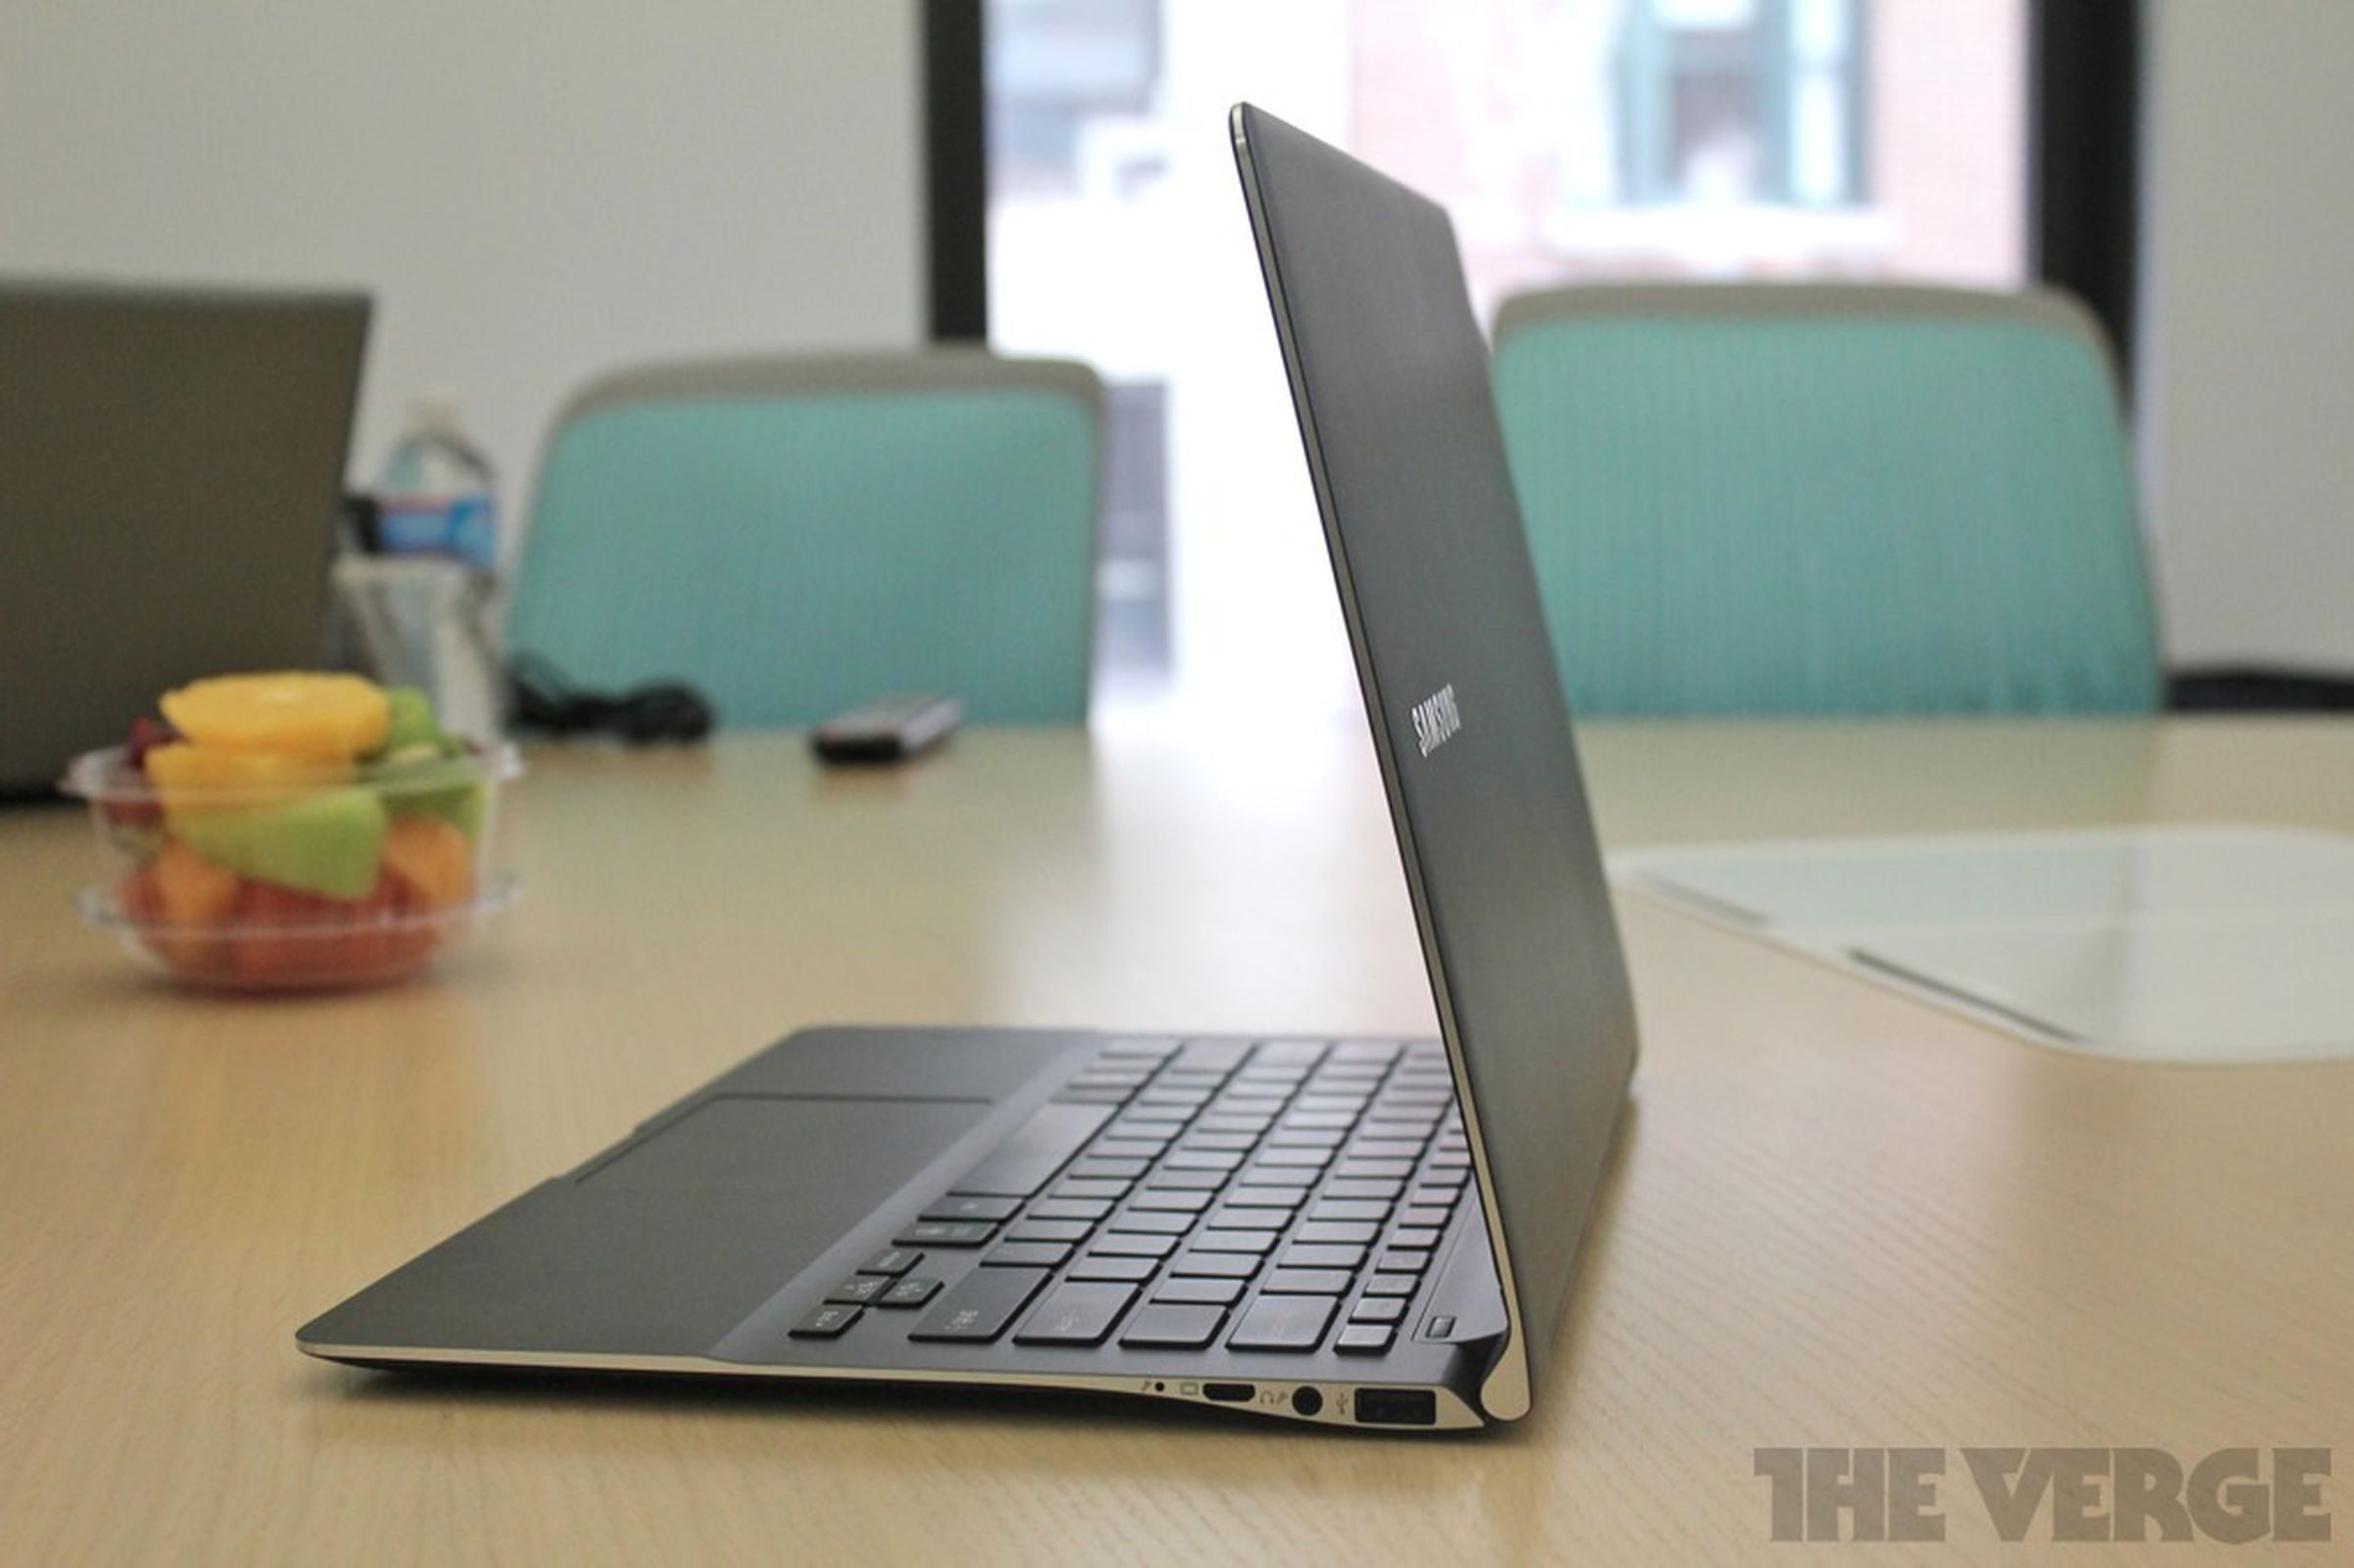 Samsung Series 9 hands-on pictures 